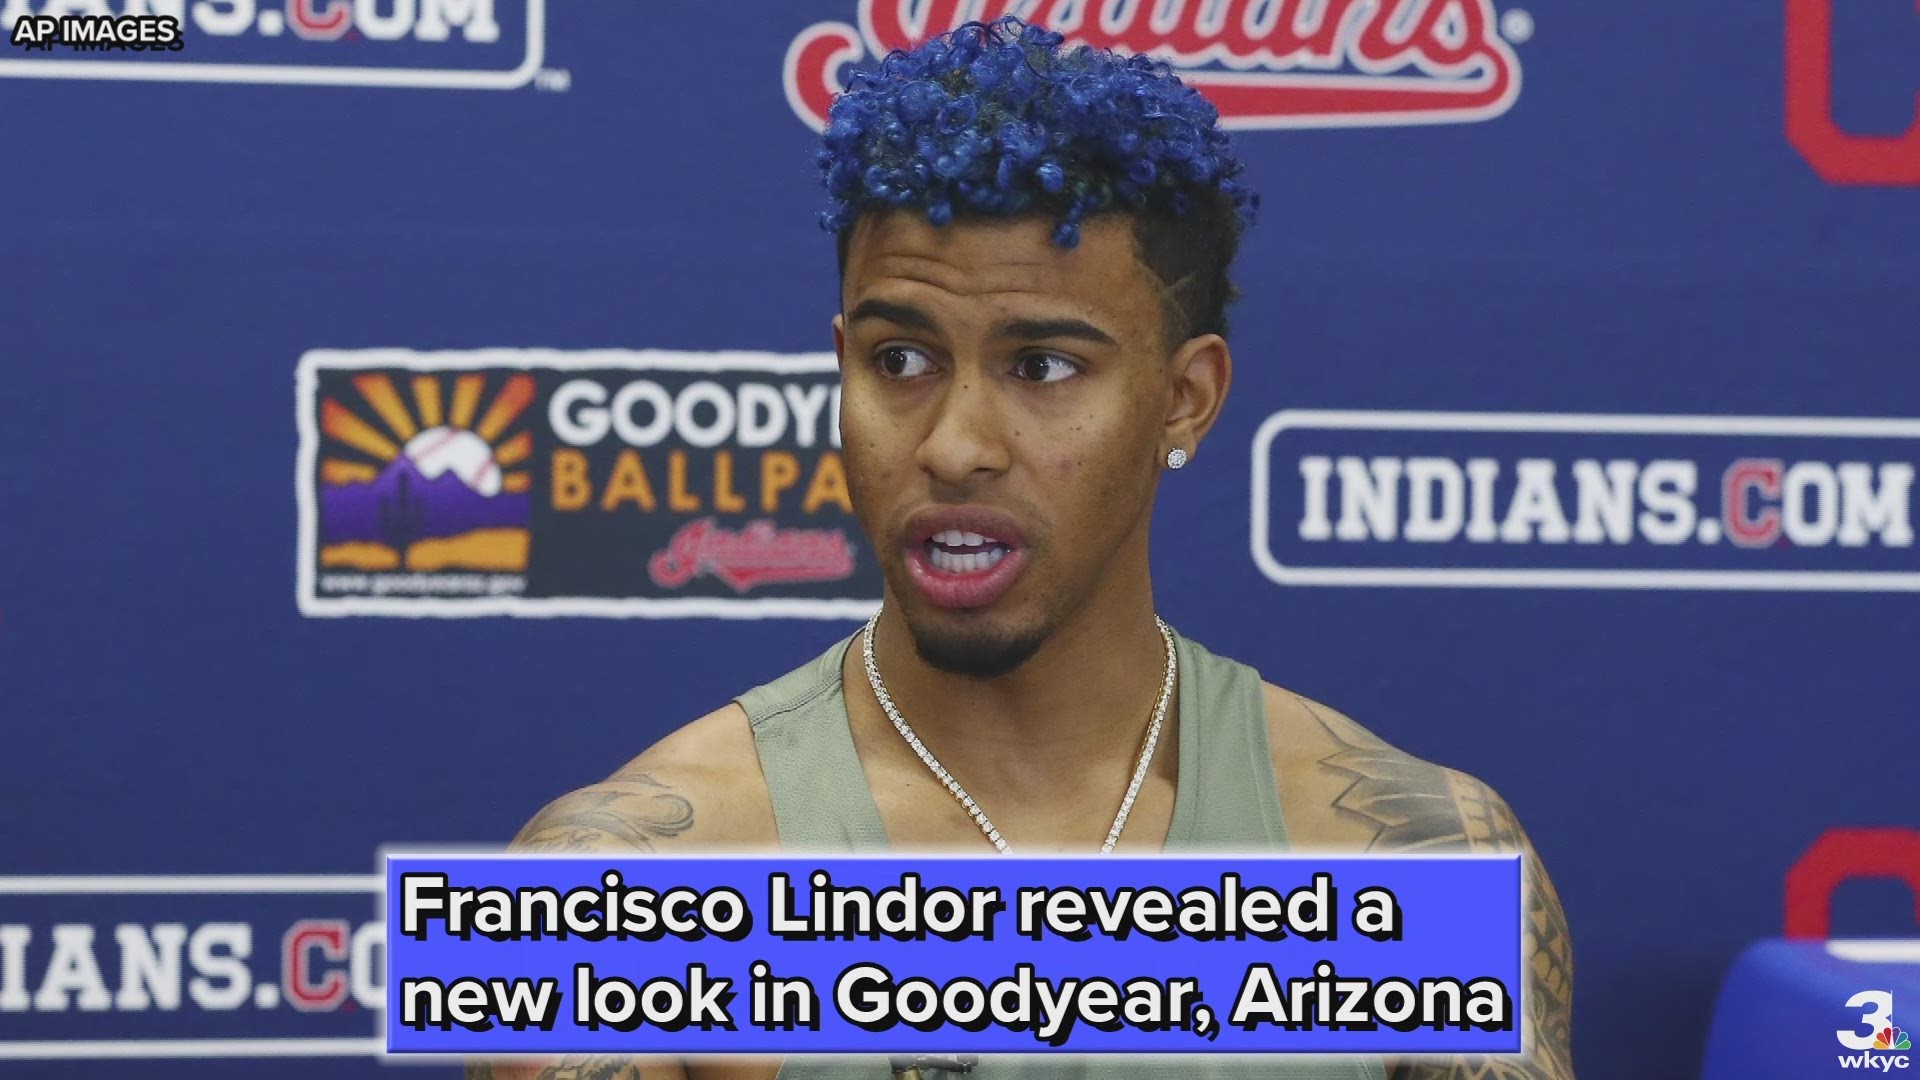 Lindor: new hair color, old pain from playoff loss